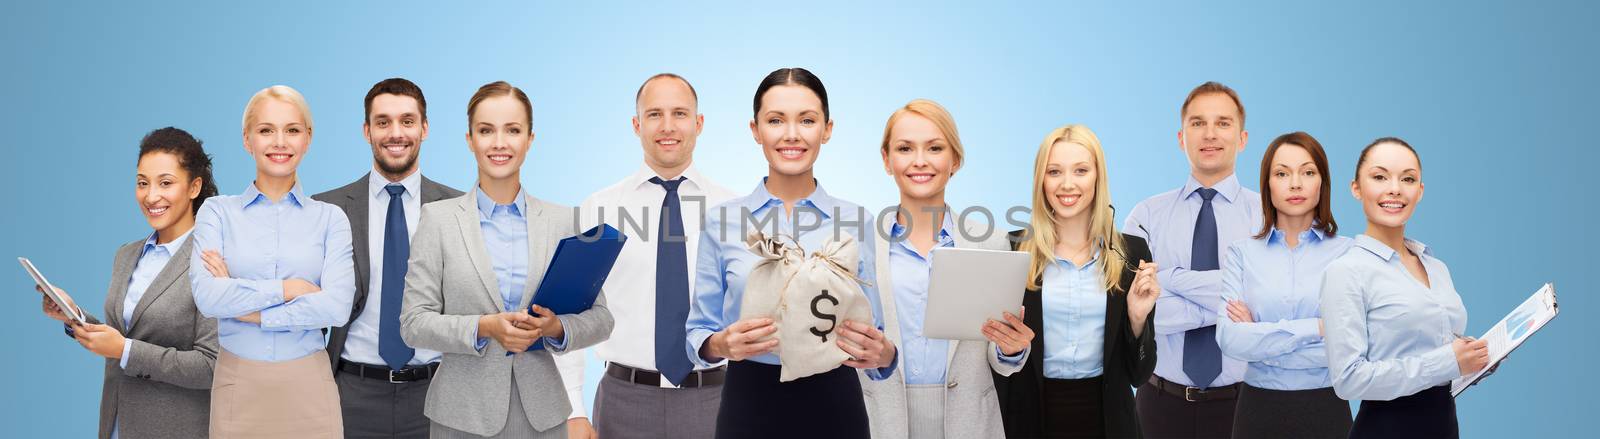 group of happy businesspeople with money bags by dolgachov